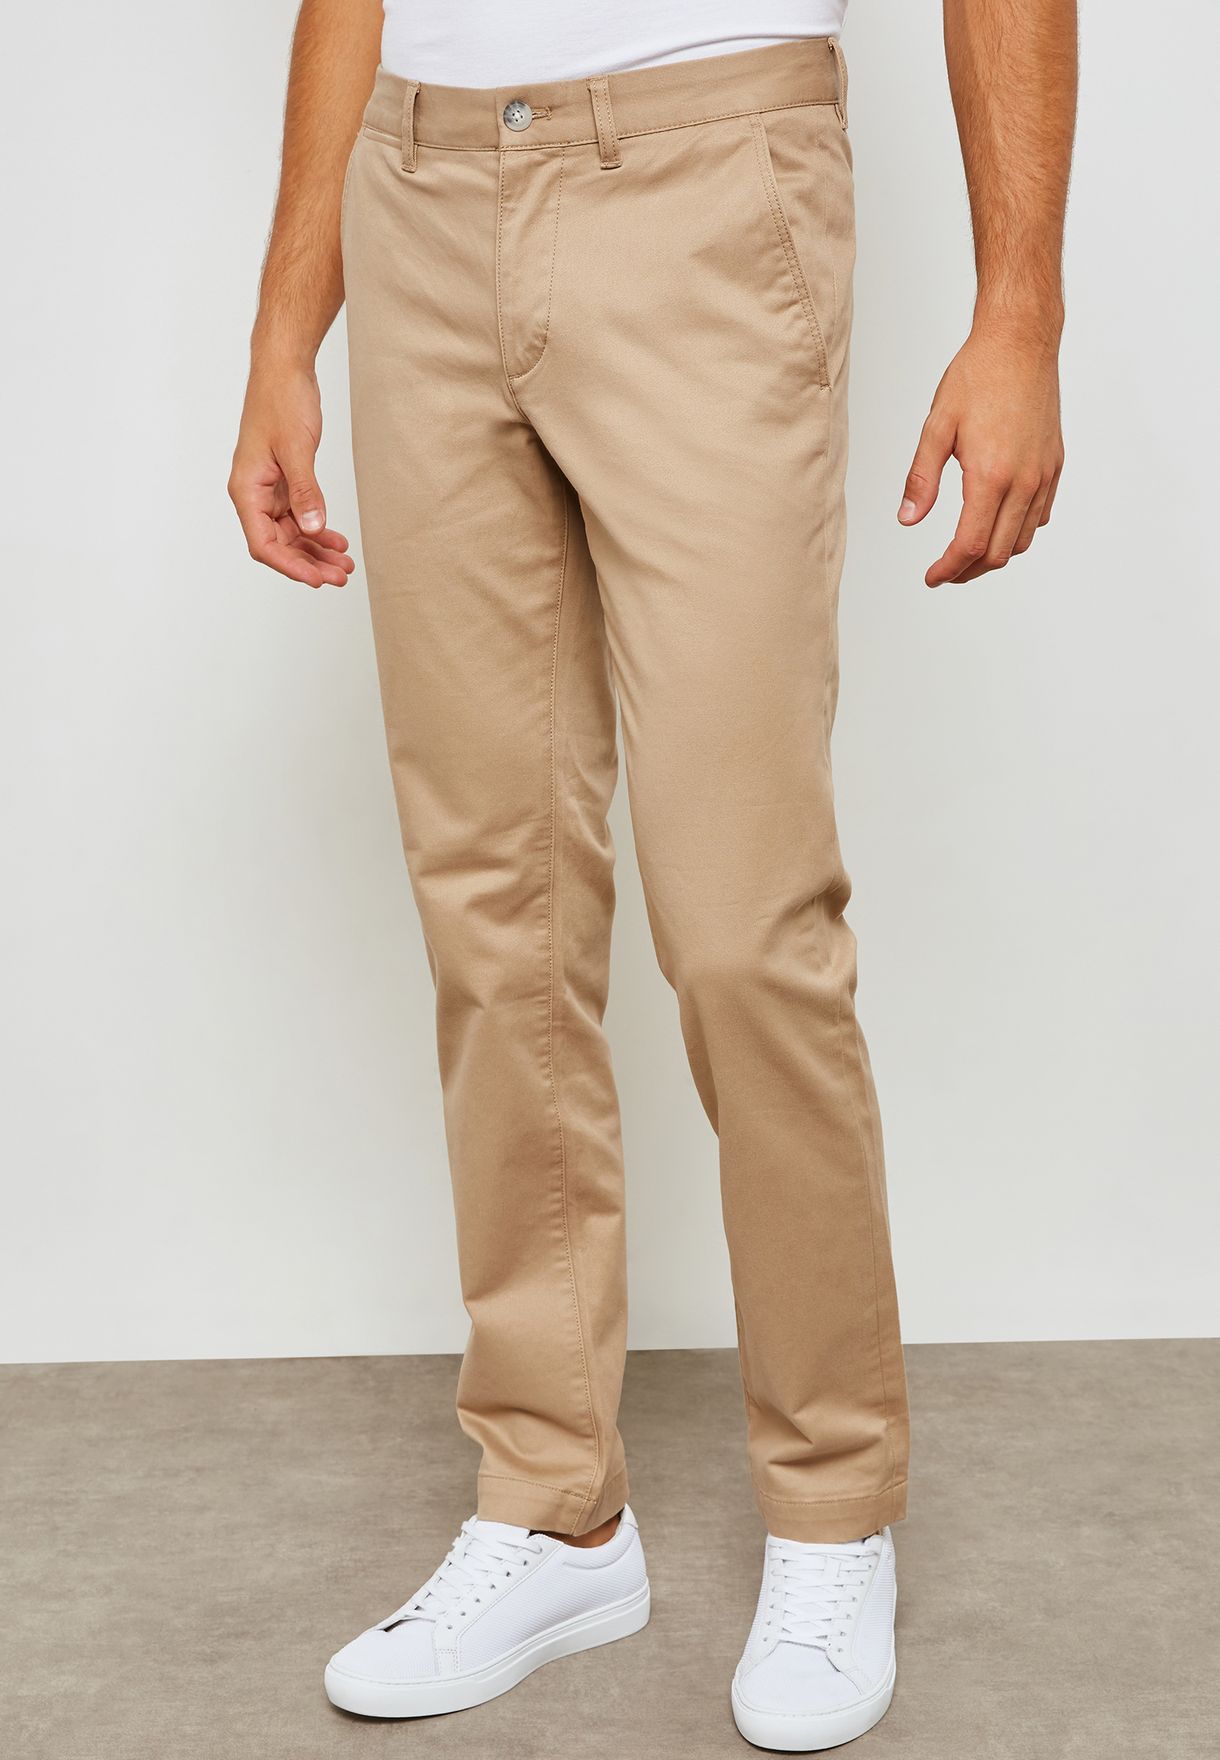 lacoste chino trousers